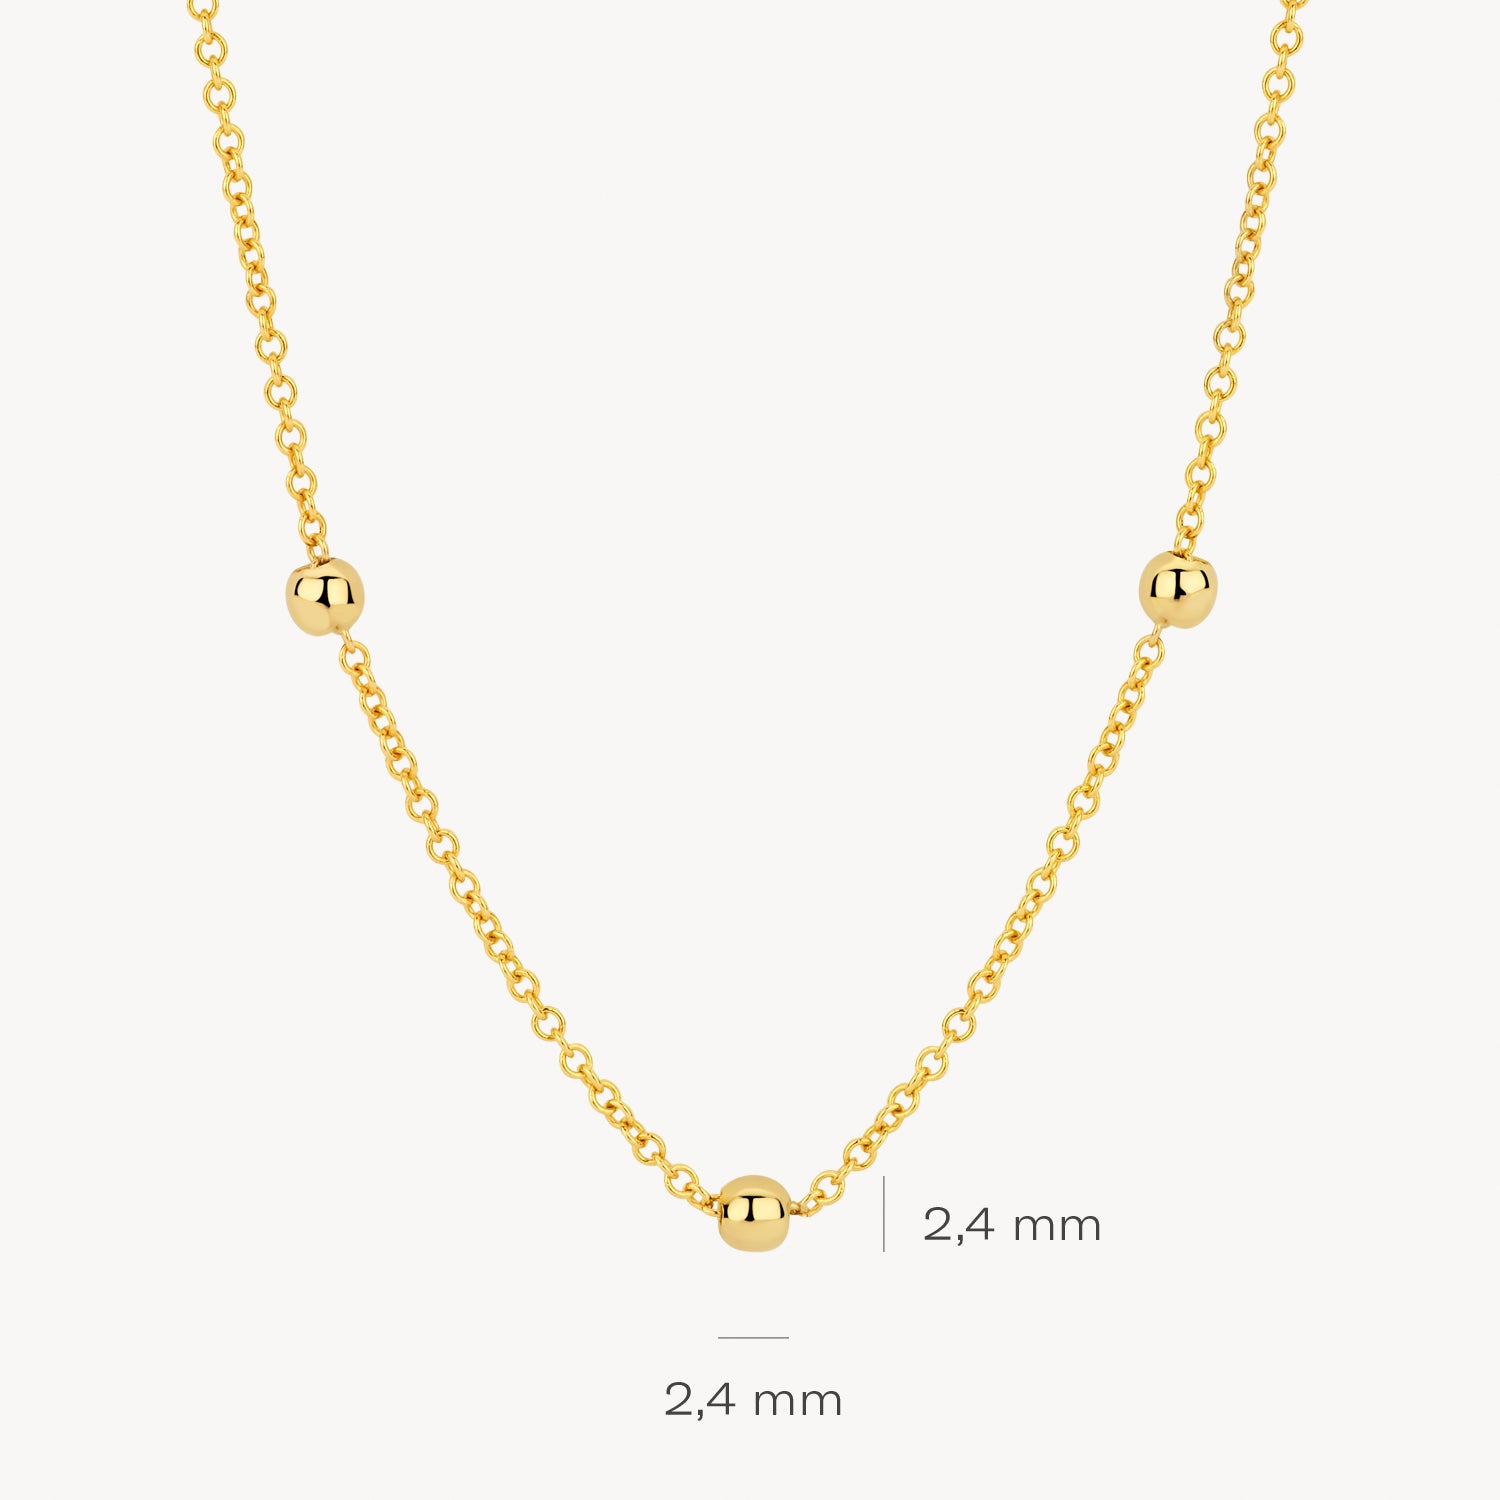 Collier 3145YGO - Or jaune 14 carats